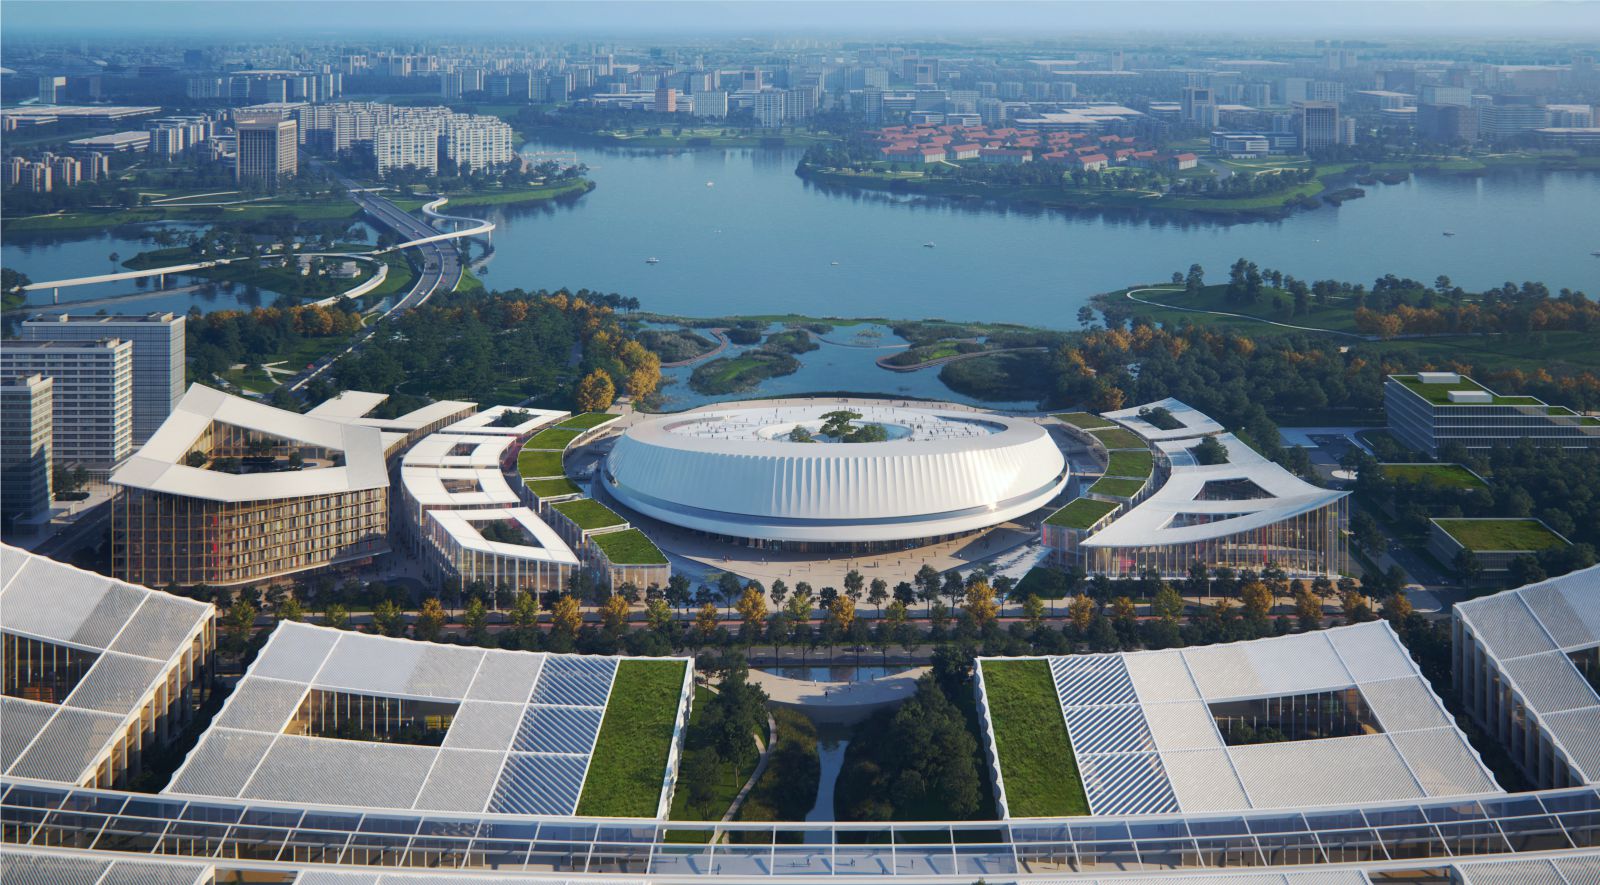 Pujiang New Town Civic Center